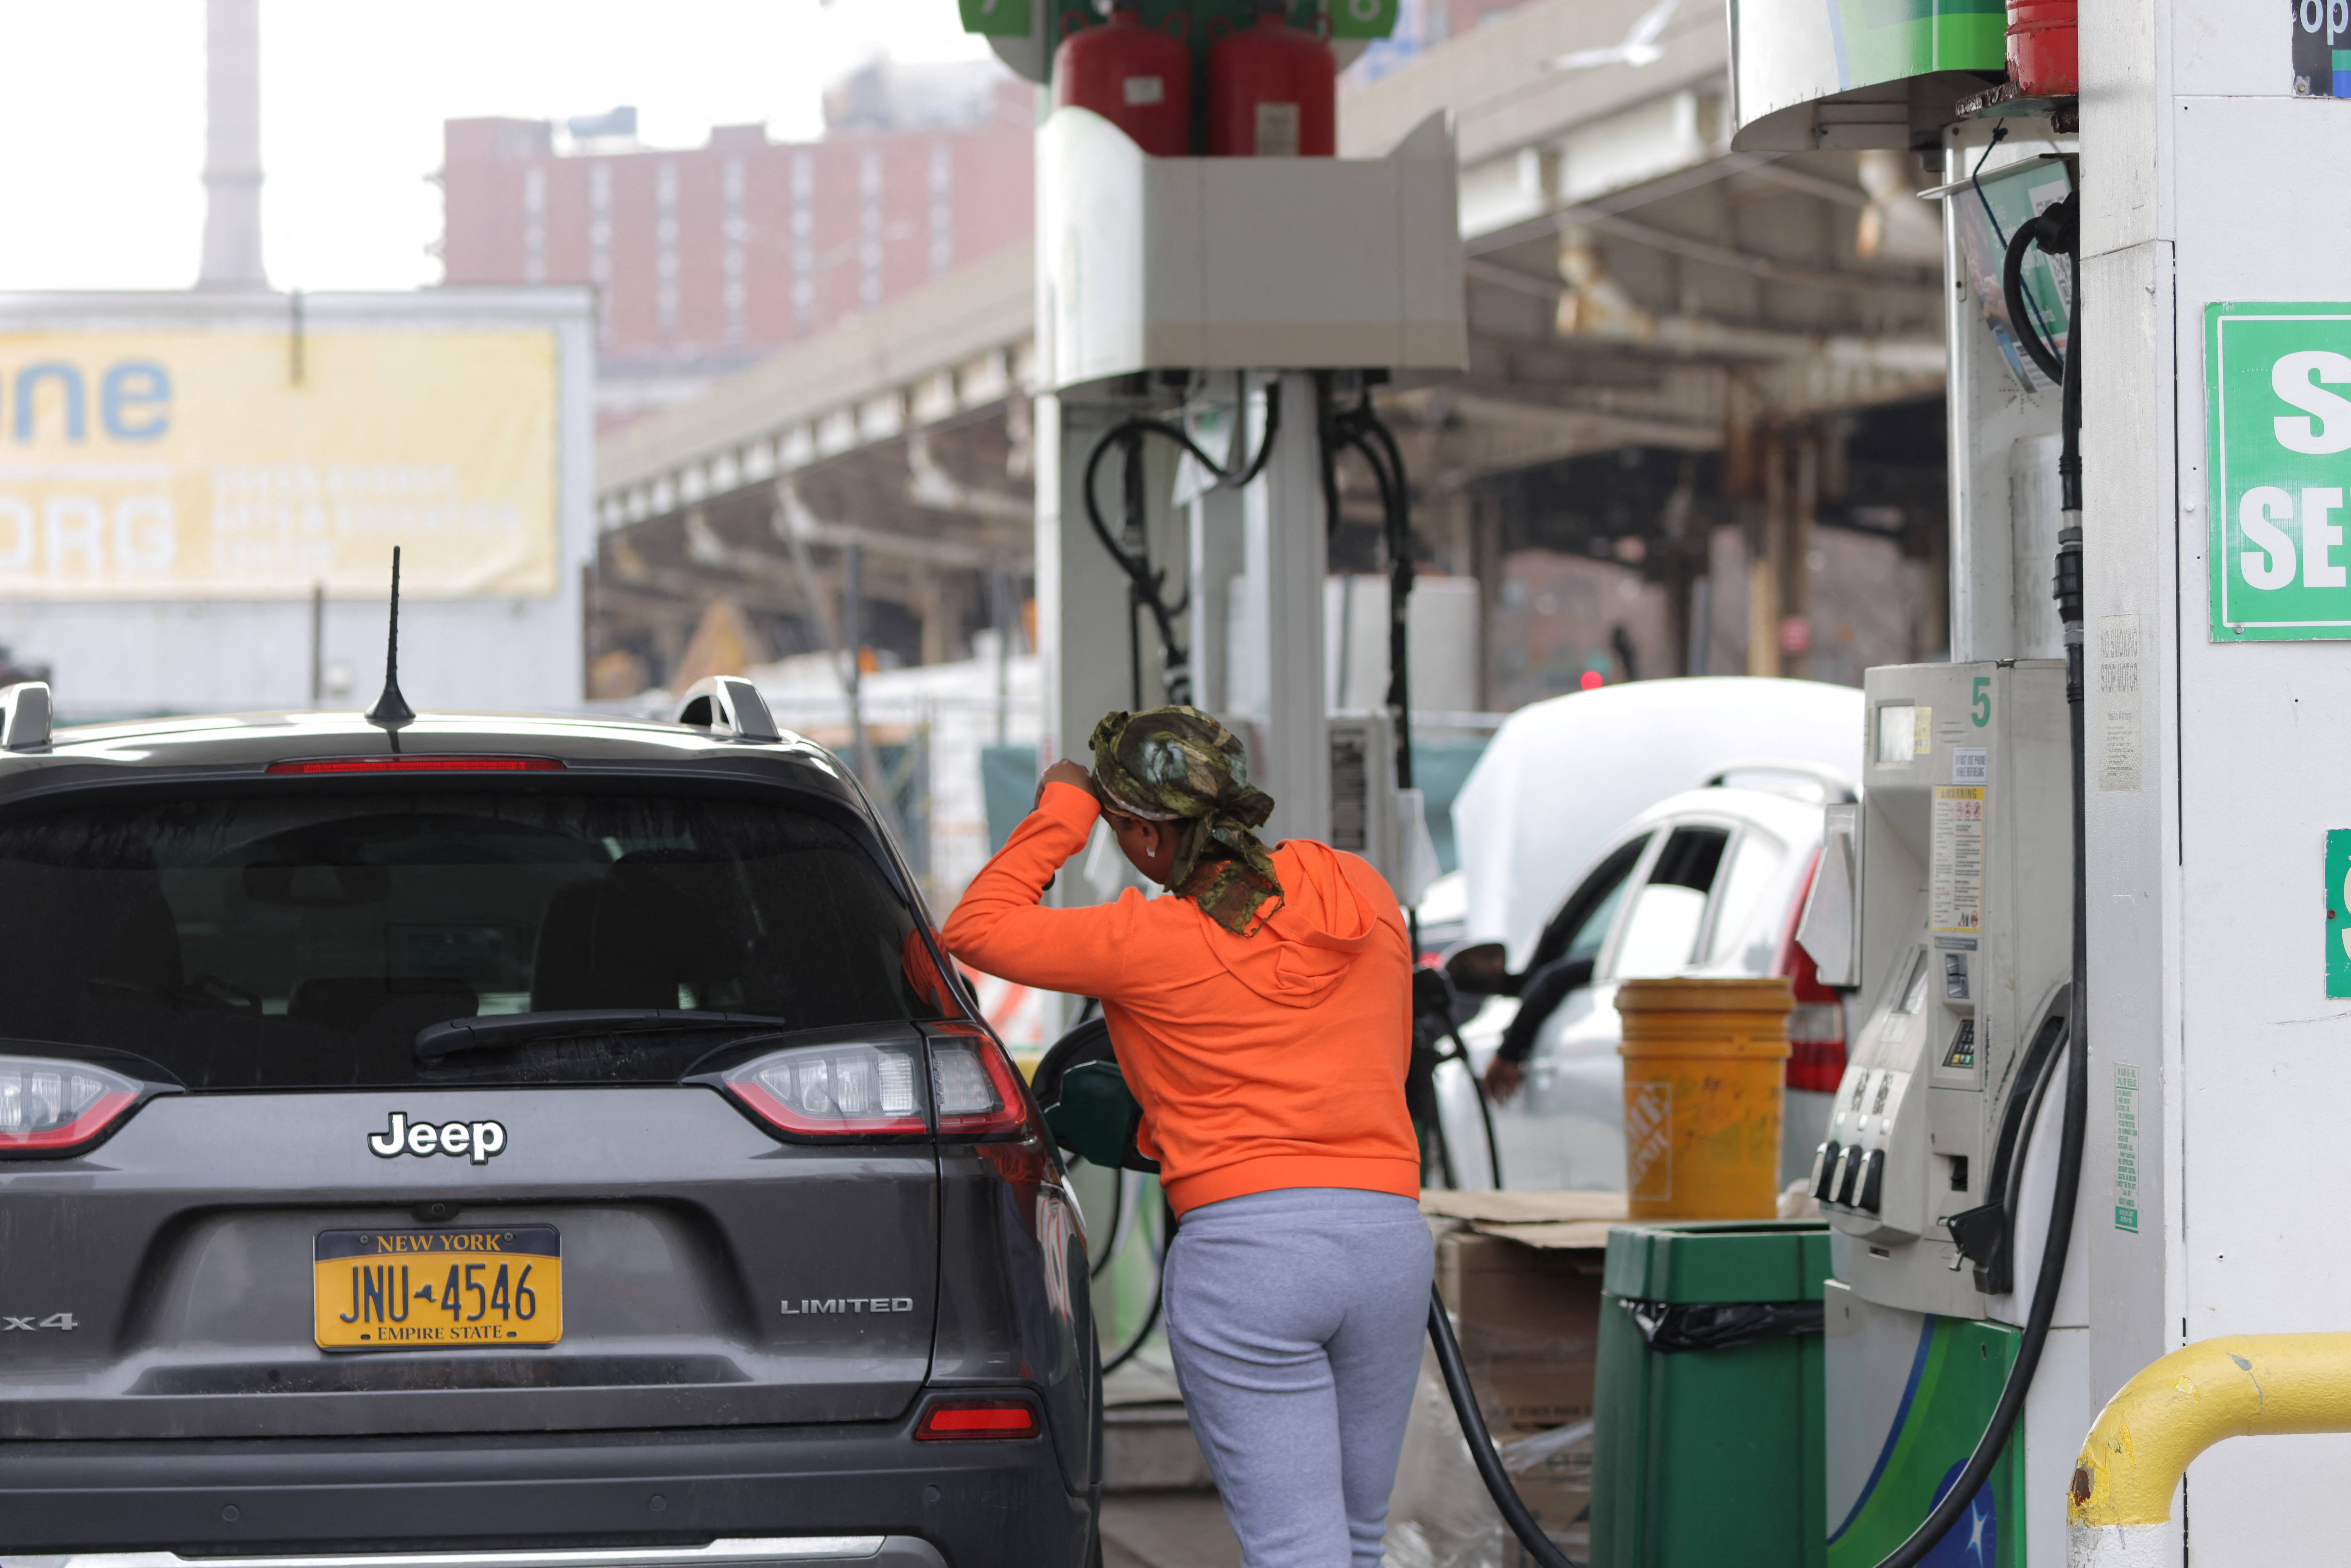 A person uses a petrol pump at a gas station as fuel prices surged in Manhattan, New York City